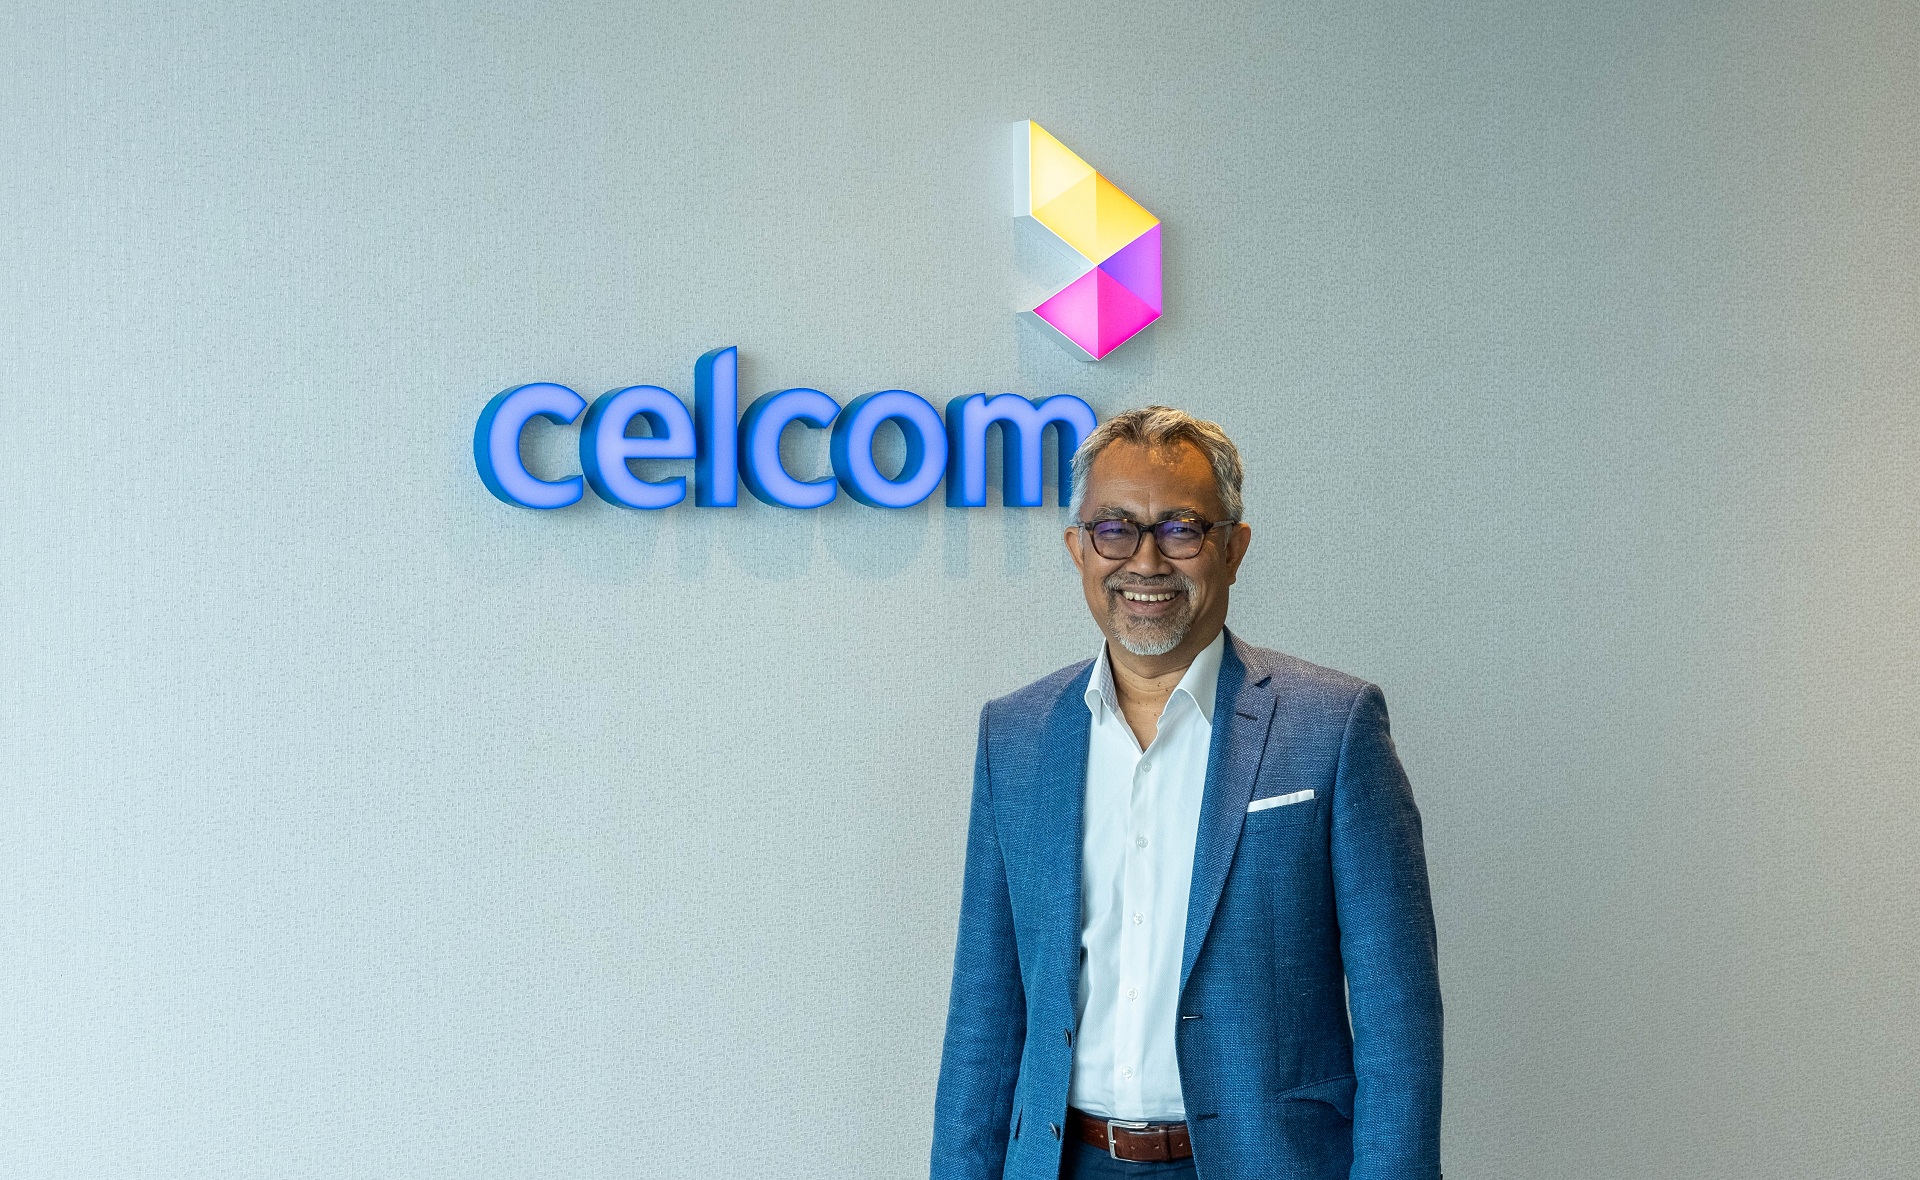 Celcom continues growth momentum in first quarter 2021 